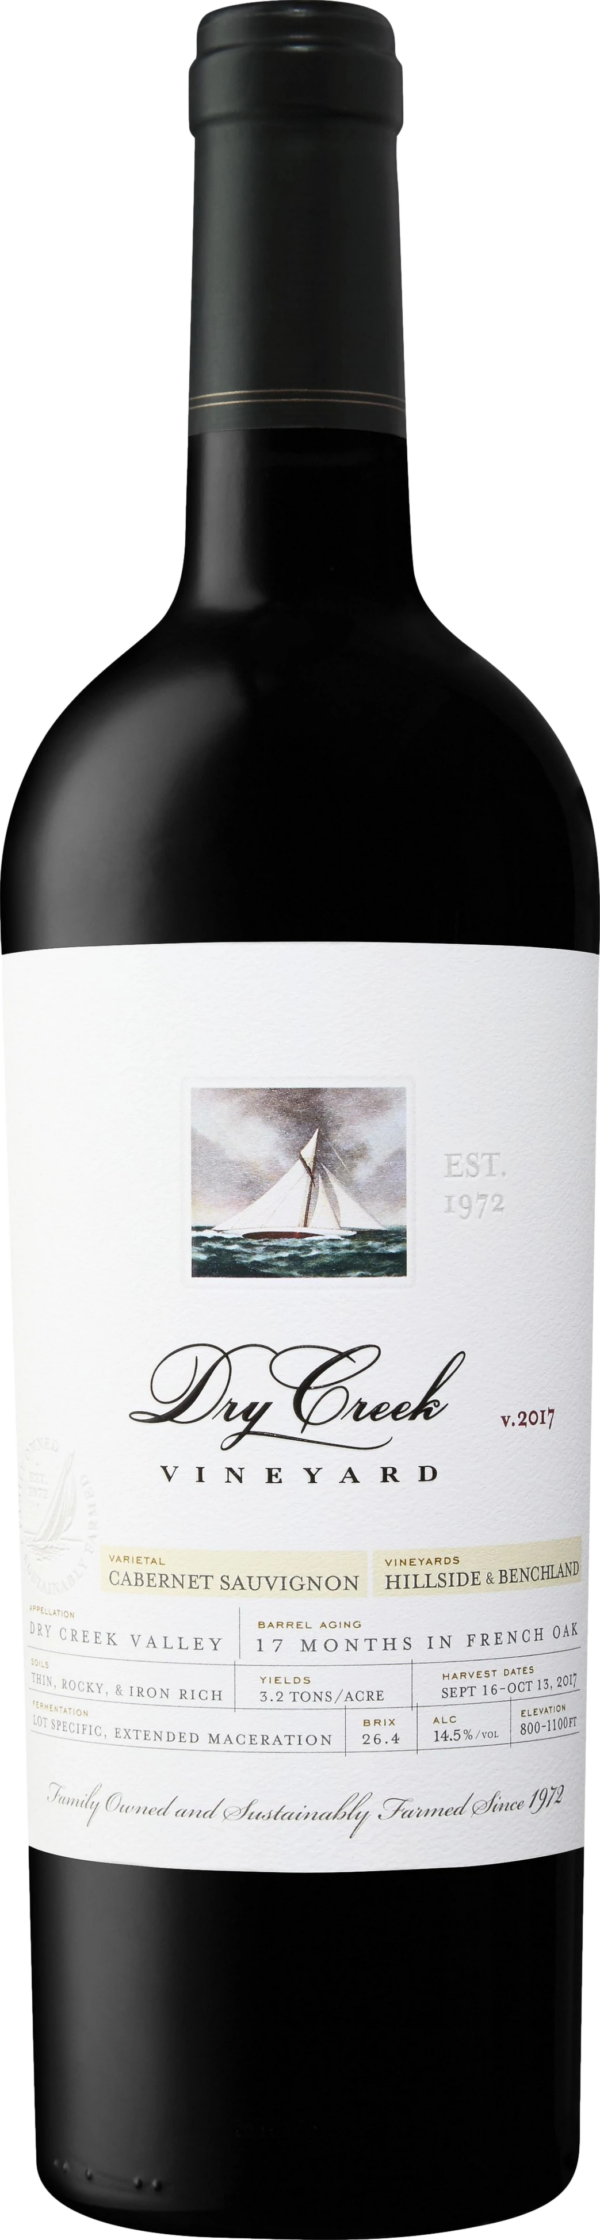 Product image of Dry Creek Cabernet Sauvignon 2018 from 8wines